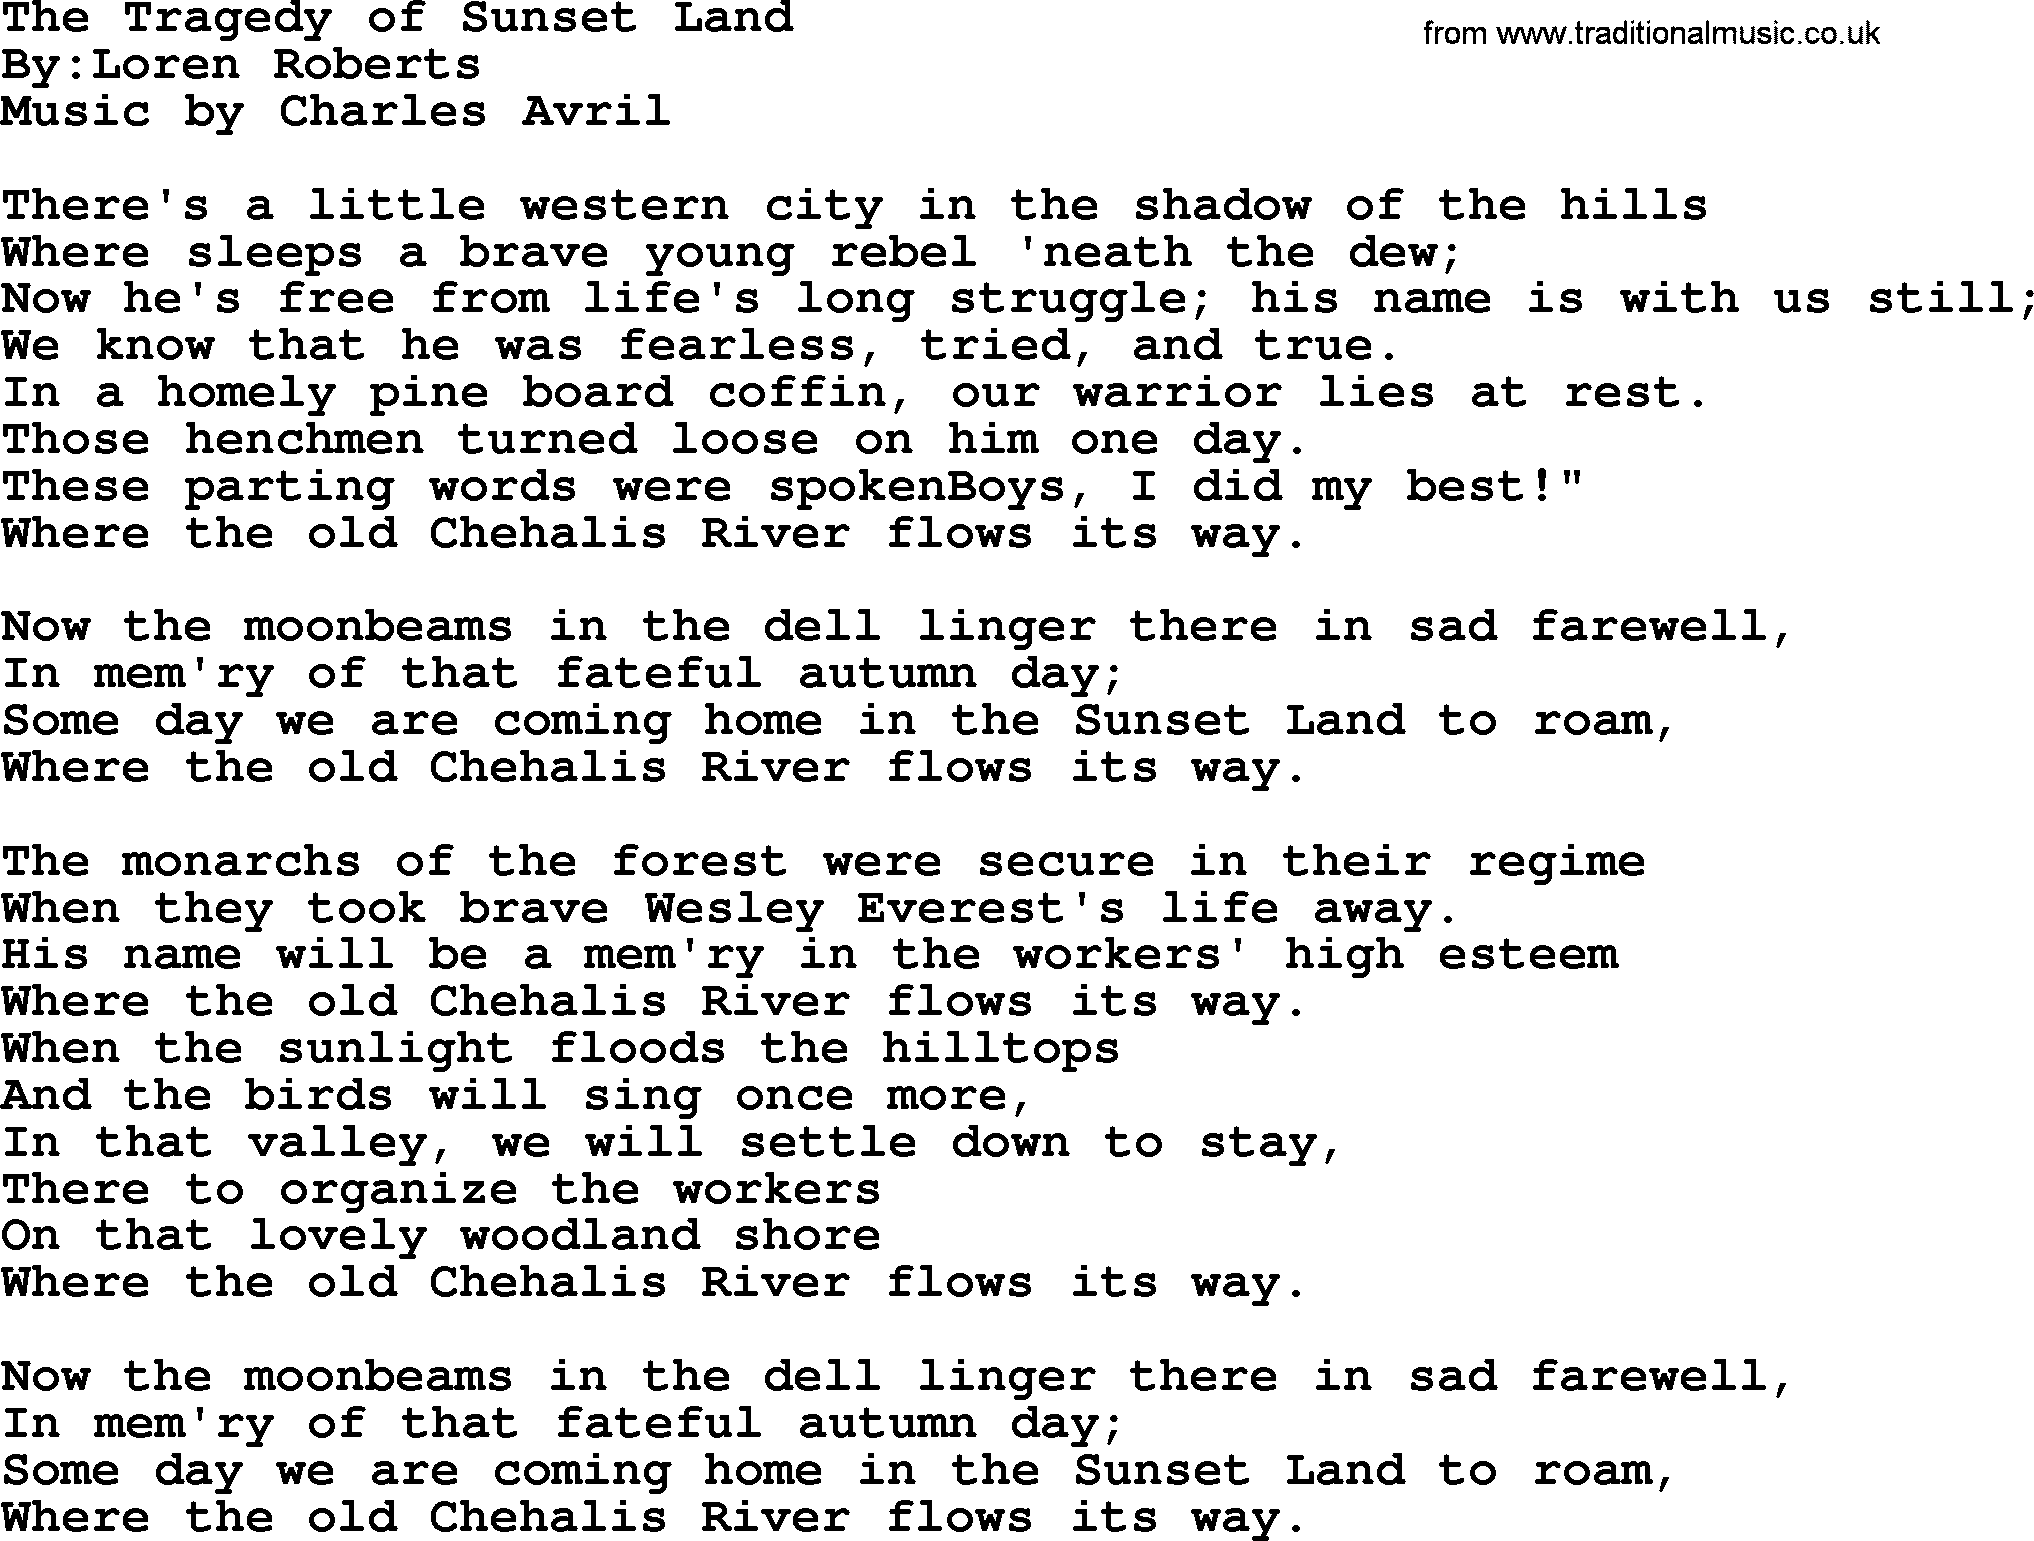 Political, Solidarity, Workers or Union song: The Tragedy Of Sunset Land, lyrics